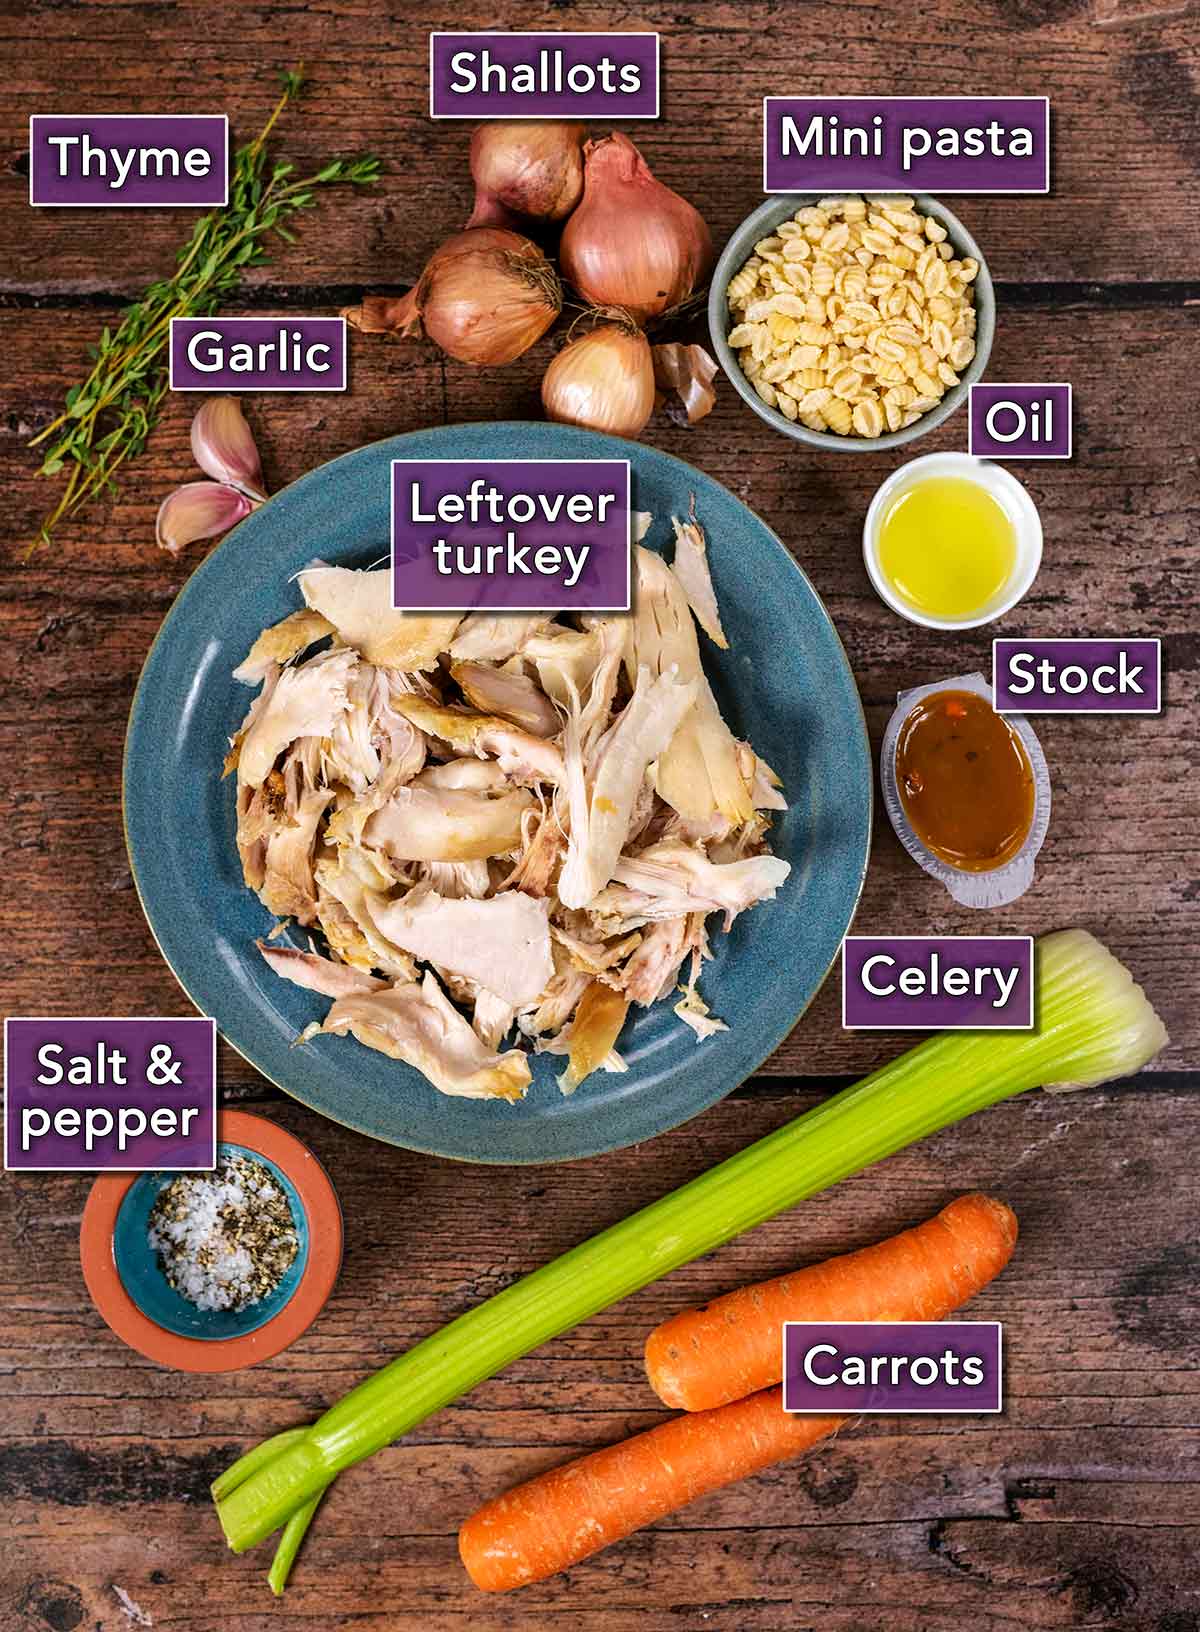 All the ingredients for this recipe on a wooden surface each with a text overlay label.